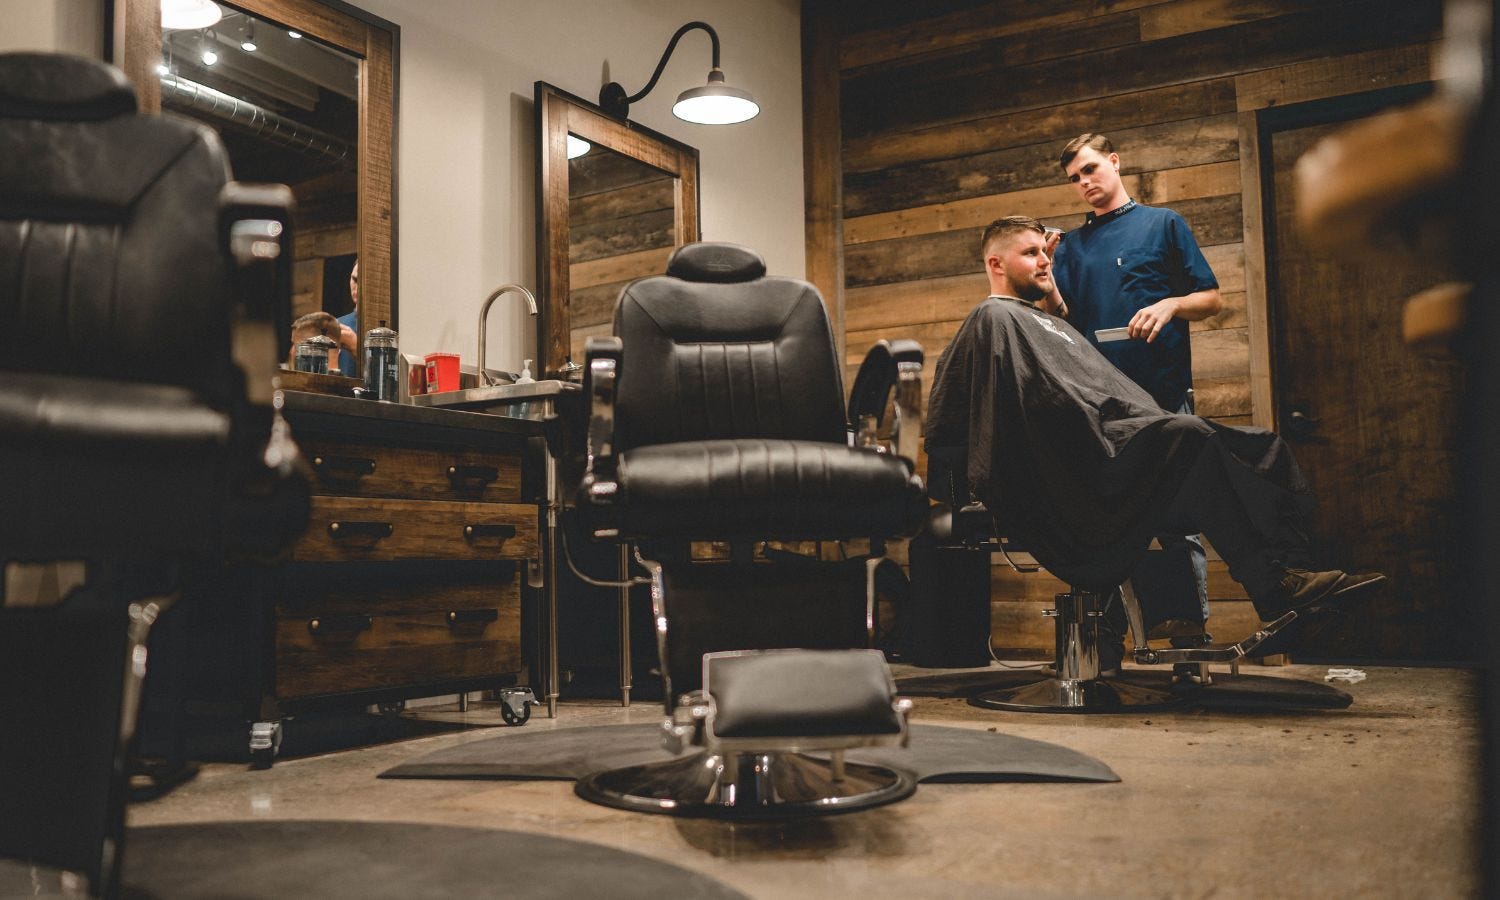 low-angle view of a barber shop with three barber chairs with footrests